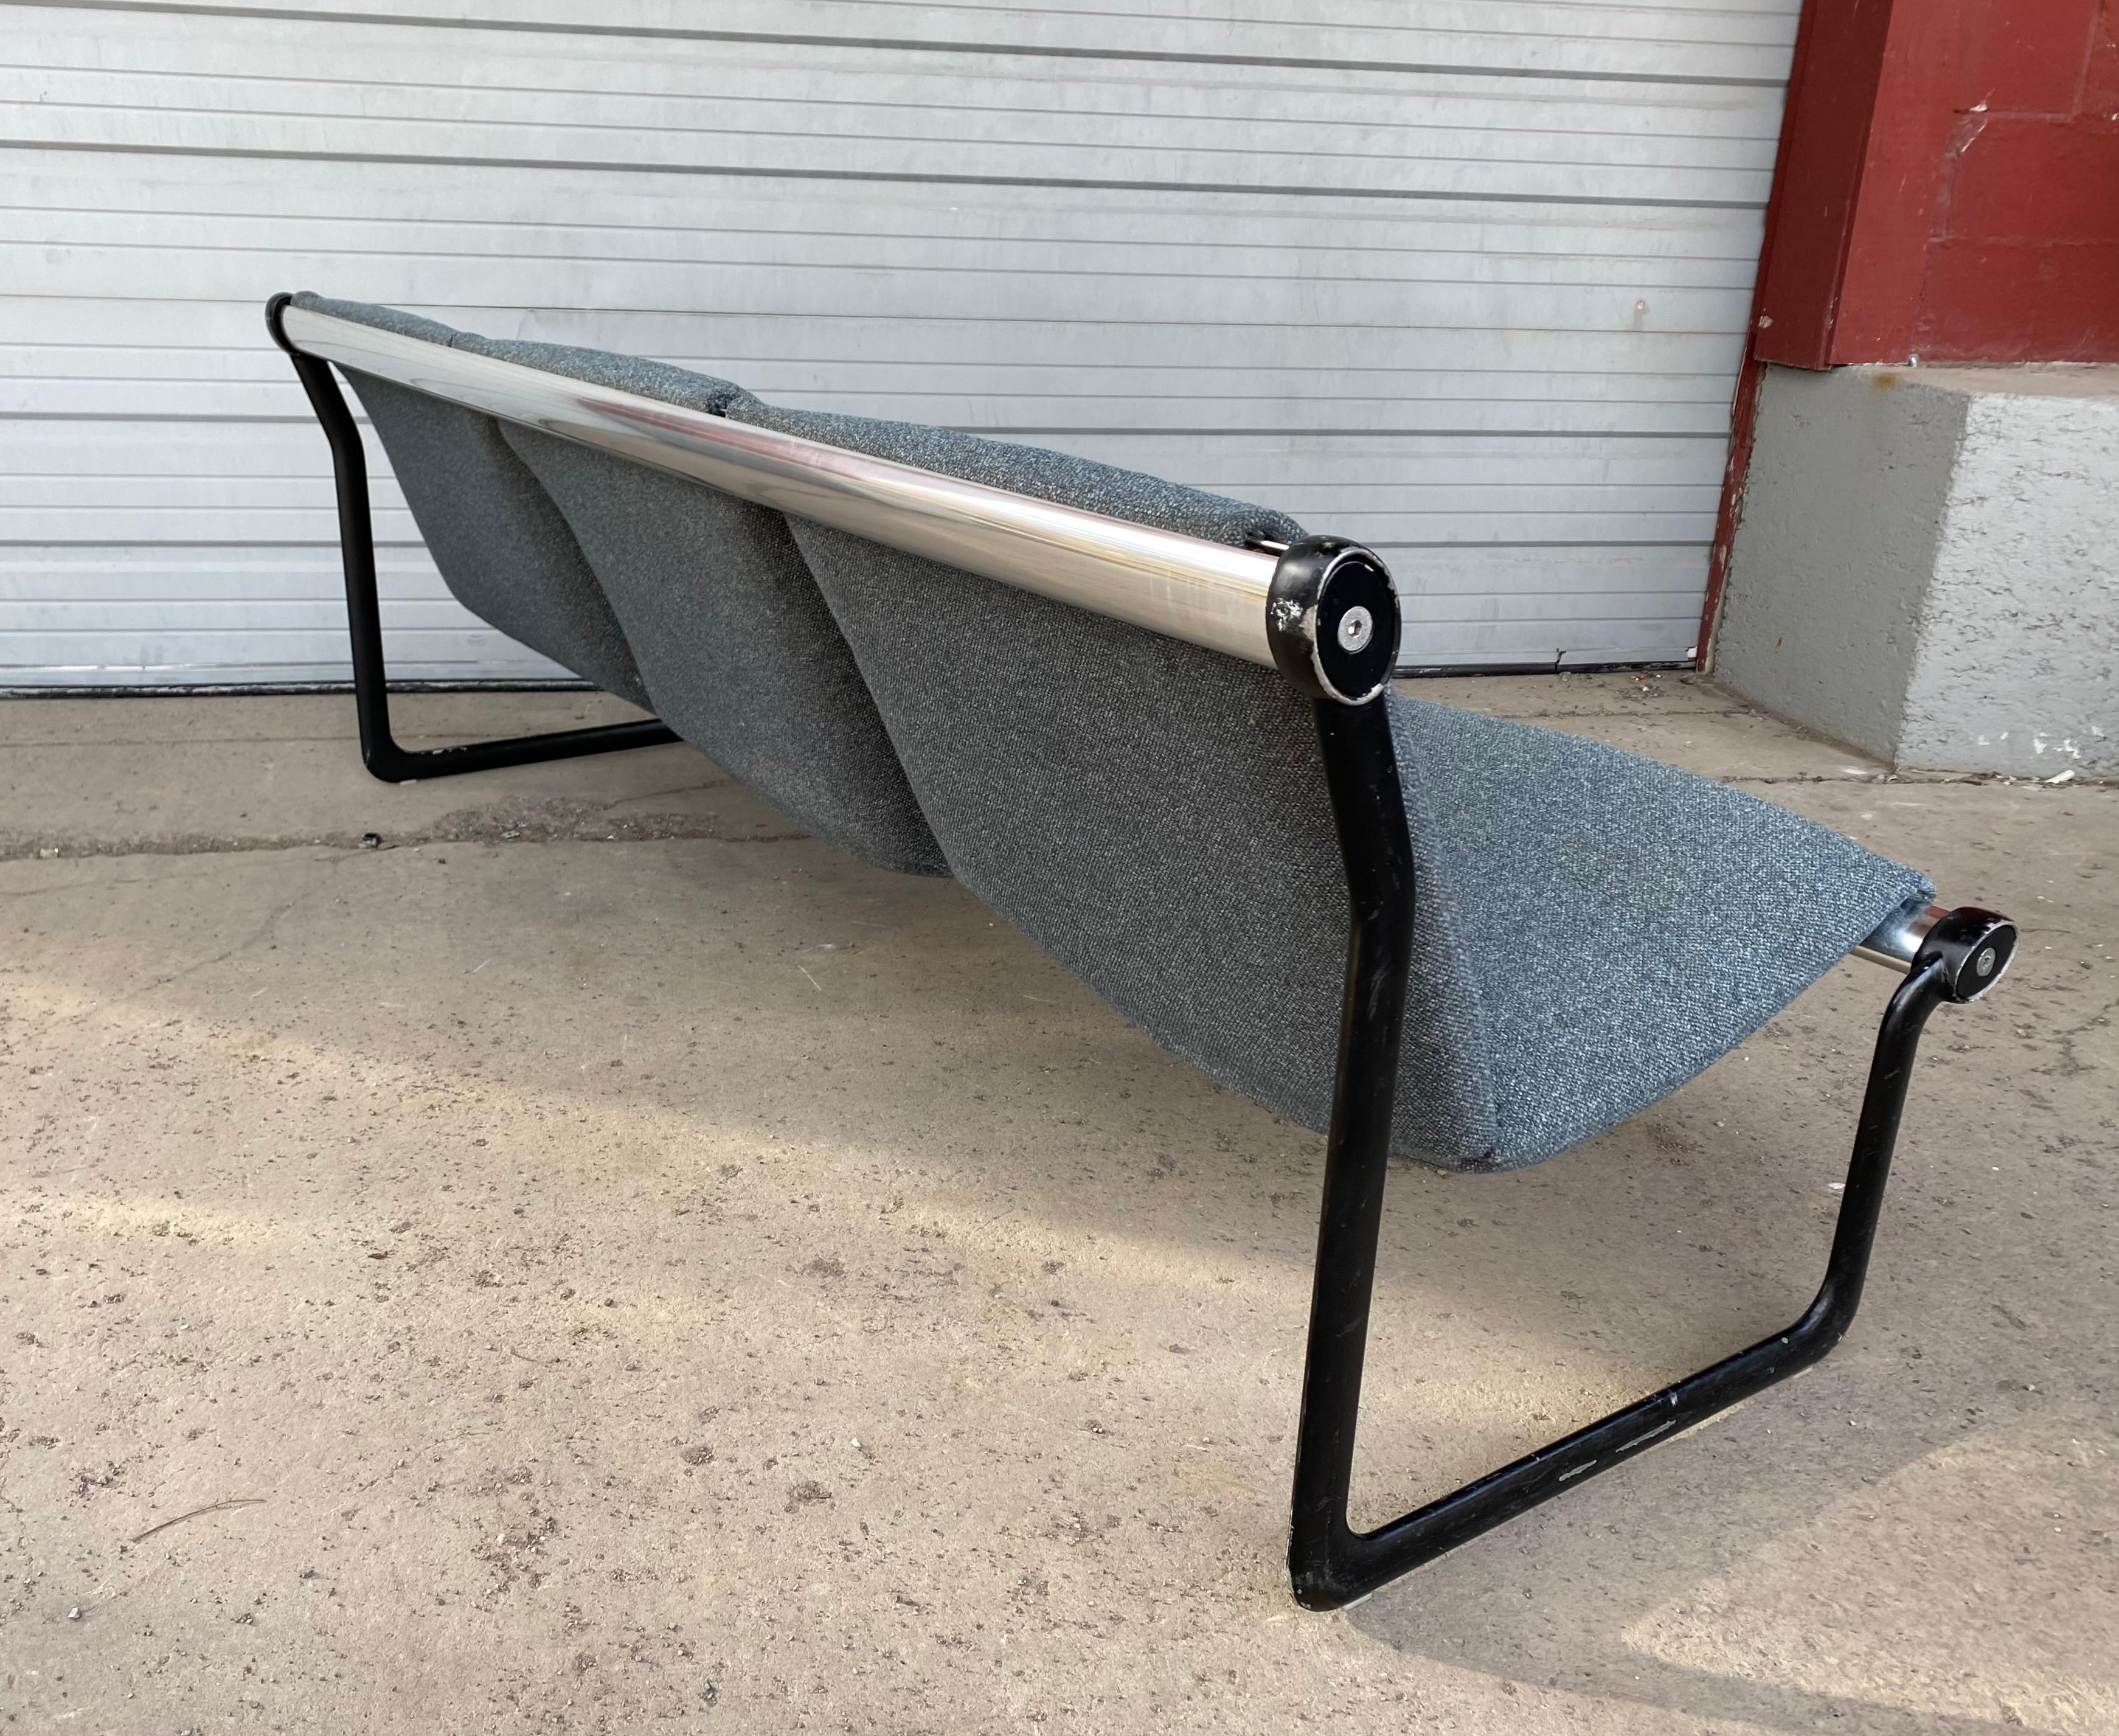 Iconic Knoll sling bench designed by Hannah Morrison, black coated aluminum frame with grey wool upholstery.
Some small marks on the frame but in otherwise great condition for its age... Retains original EARLY KNOLL label, hand delivery avail to